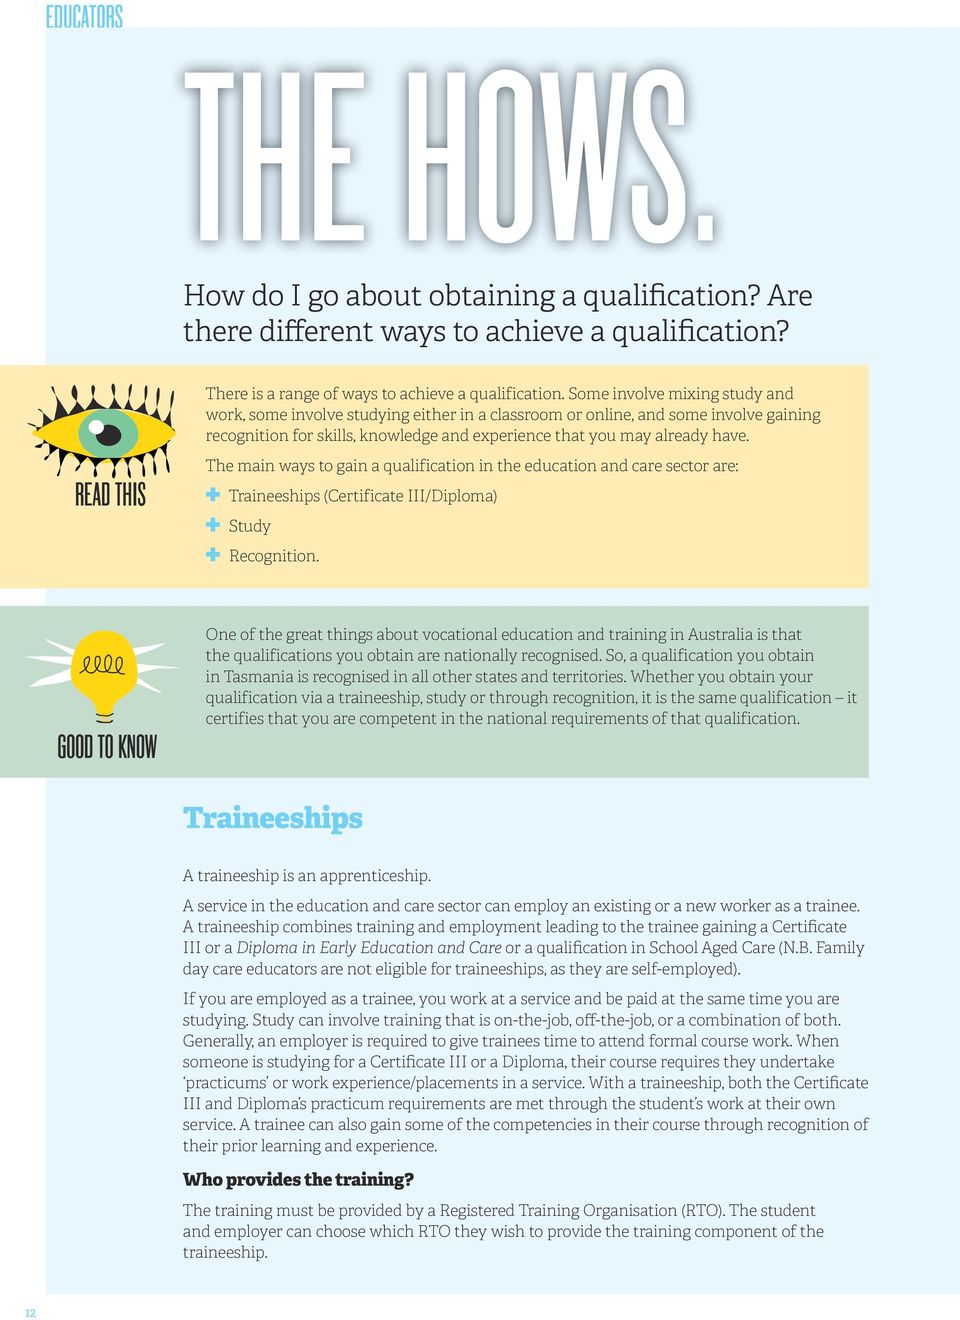 READ THIS The main ways to gain a qualification in the education and care sector are: Traineeships (Certificate III/Diploma) Study Recognition.